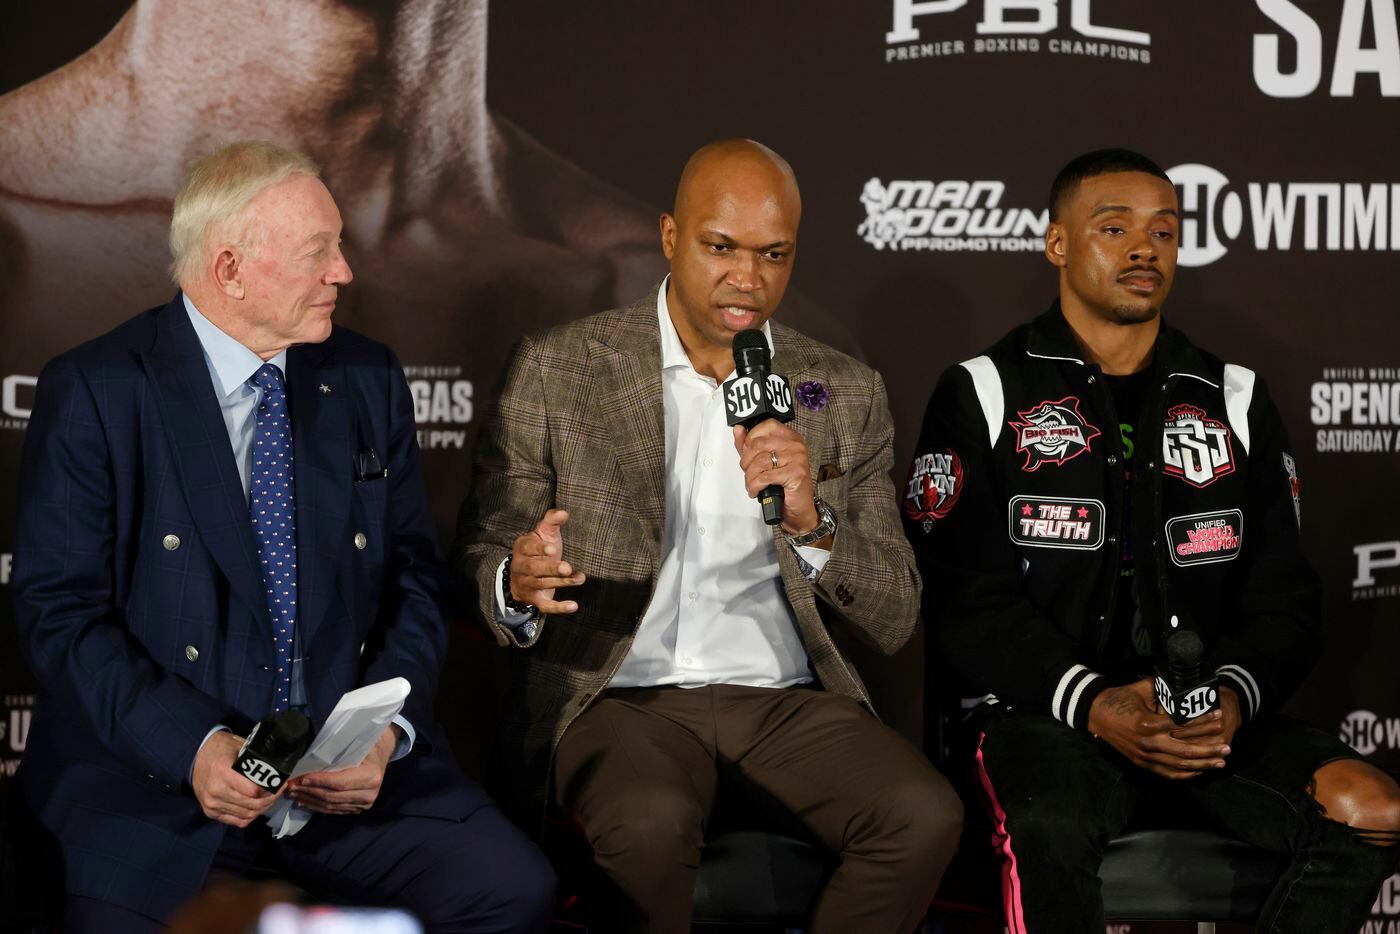 Dallas Cowboys owner Jerry Jones , trainer Derrick James, and WBC and IBF world champion...